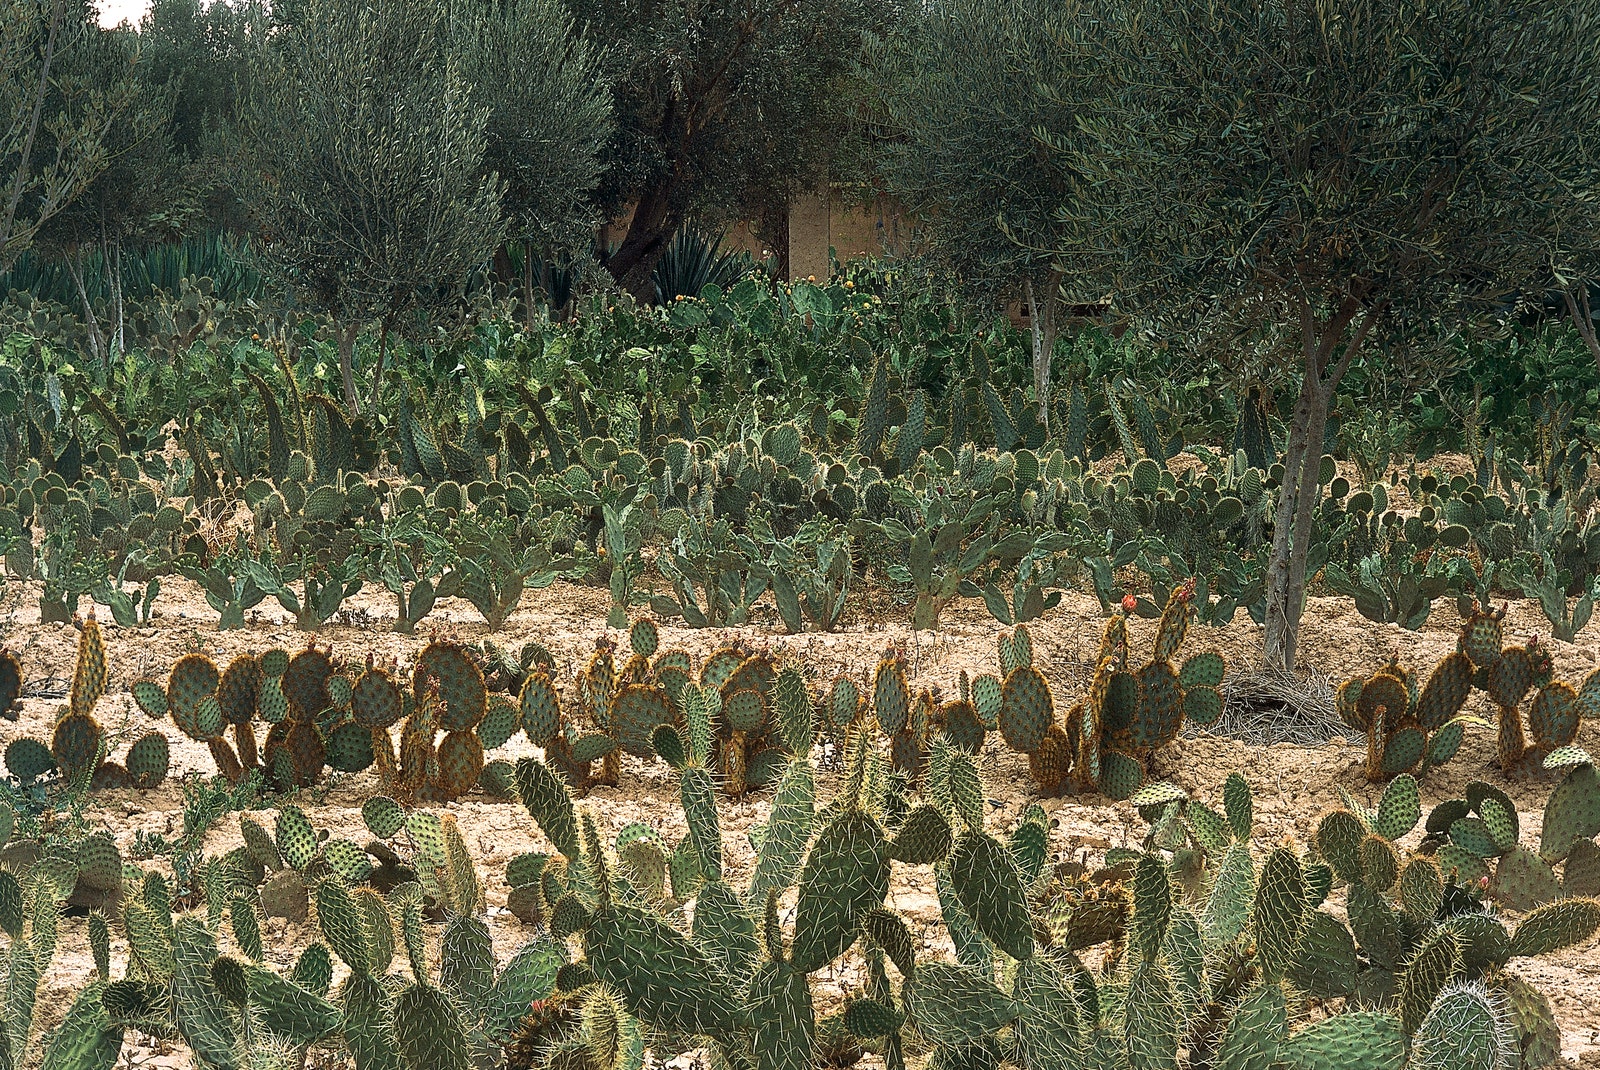 Does global warming call for innovative cacti gardens?